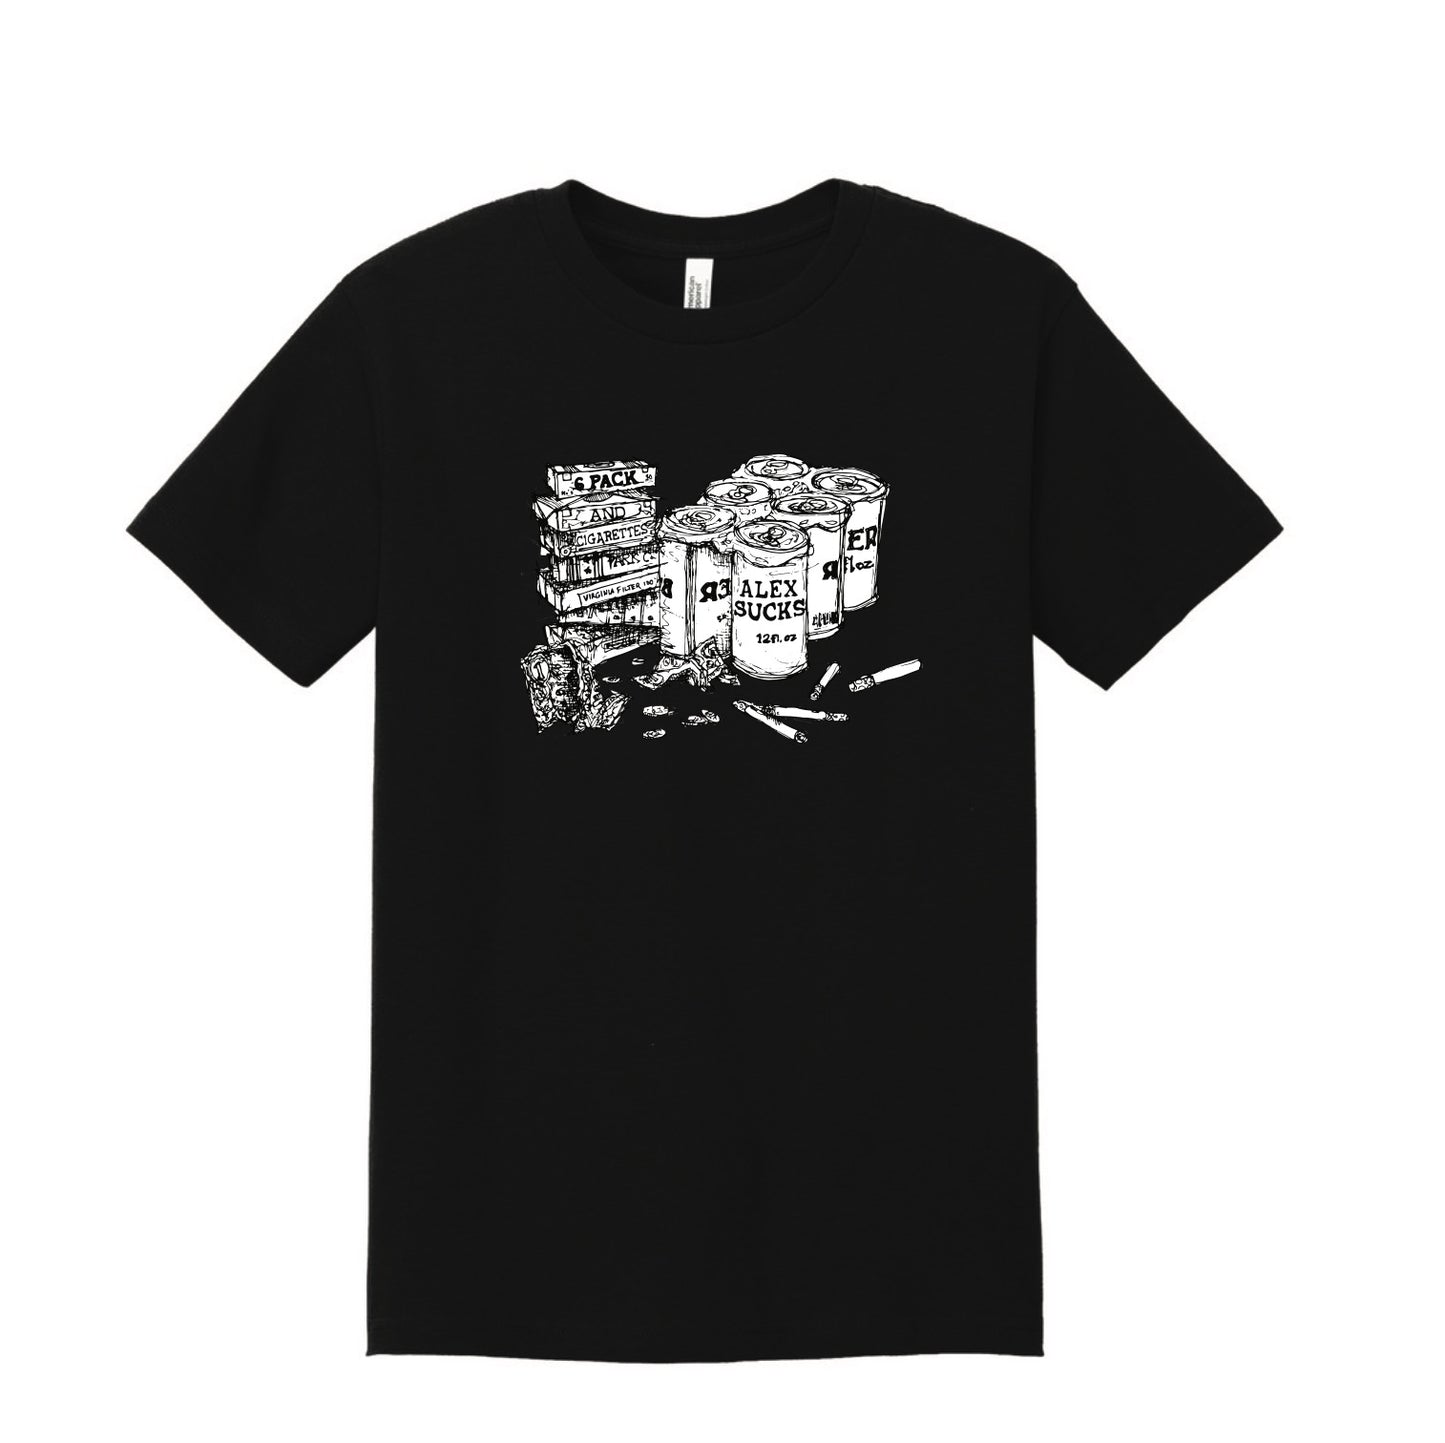 6 Pack And Cigarettes T-Shirt - Black